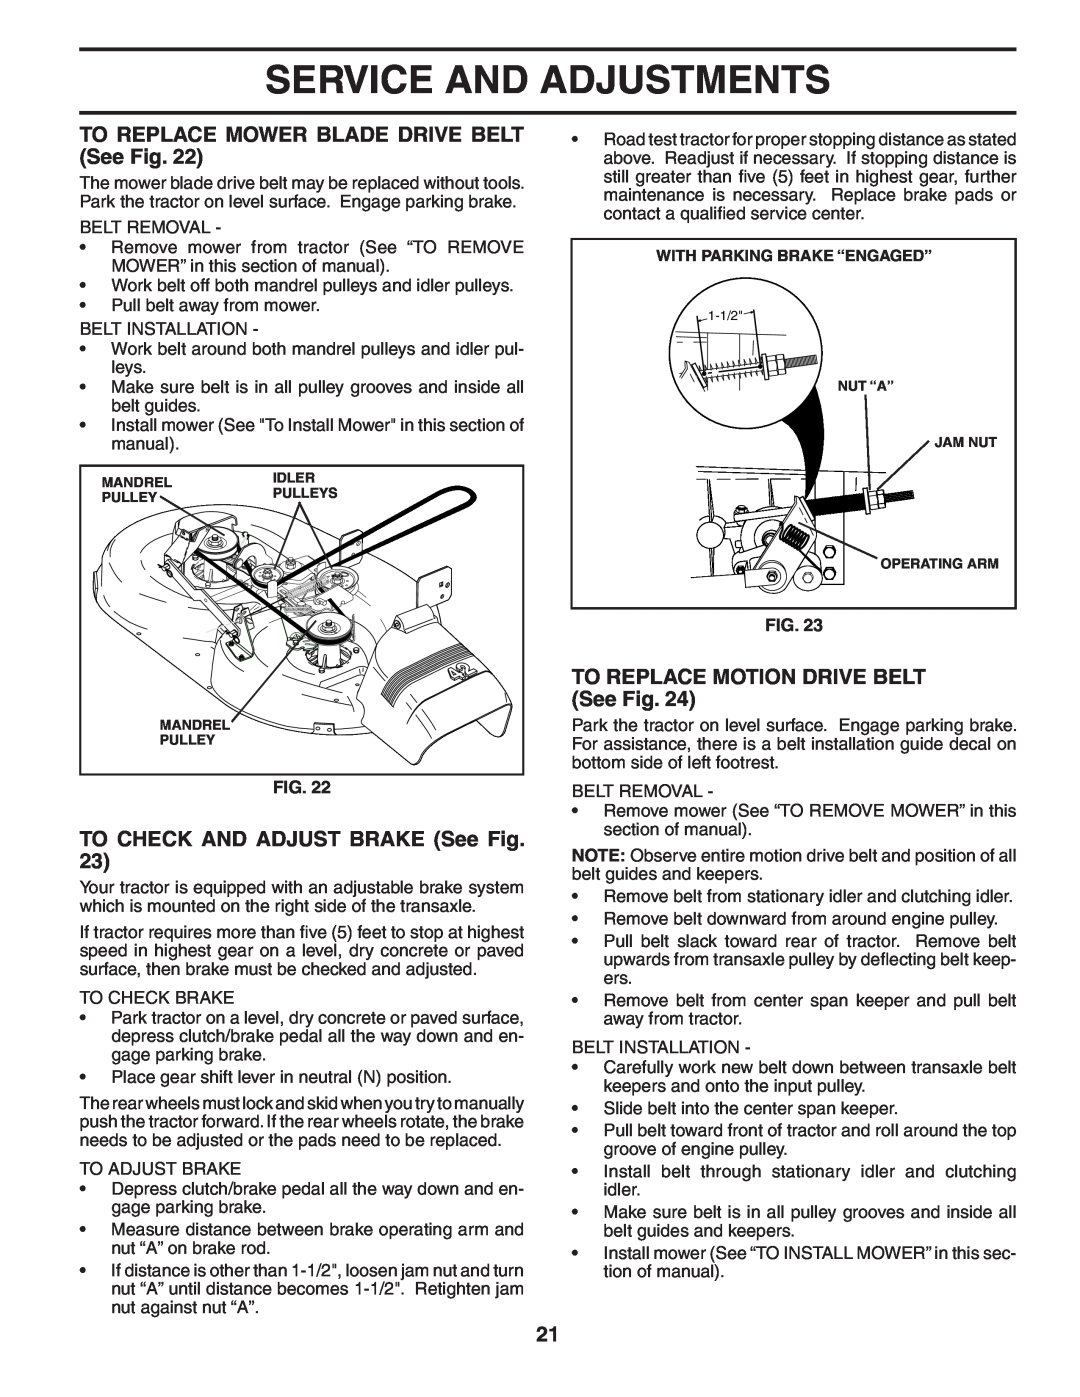 Poulan 185491 TO REPLACE MOWER BLADE DRIVE BELT See Fig, TO CHECK AND ADJUST BRAKE See Fig, Service And Adjustments 